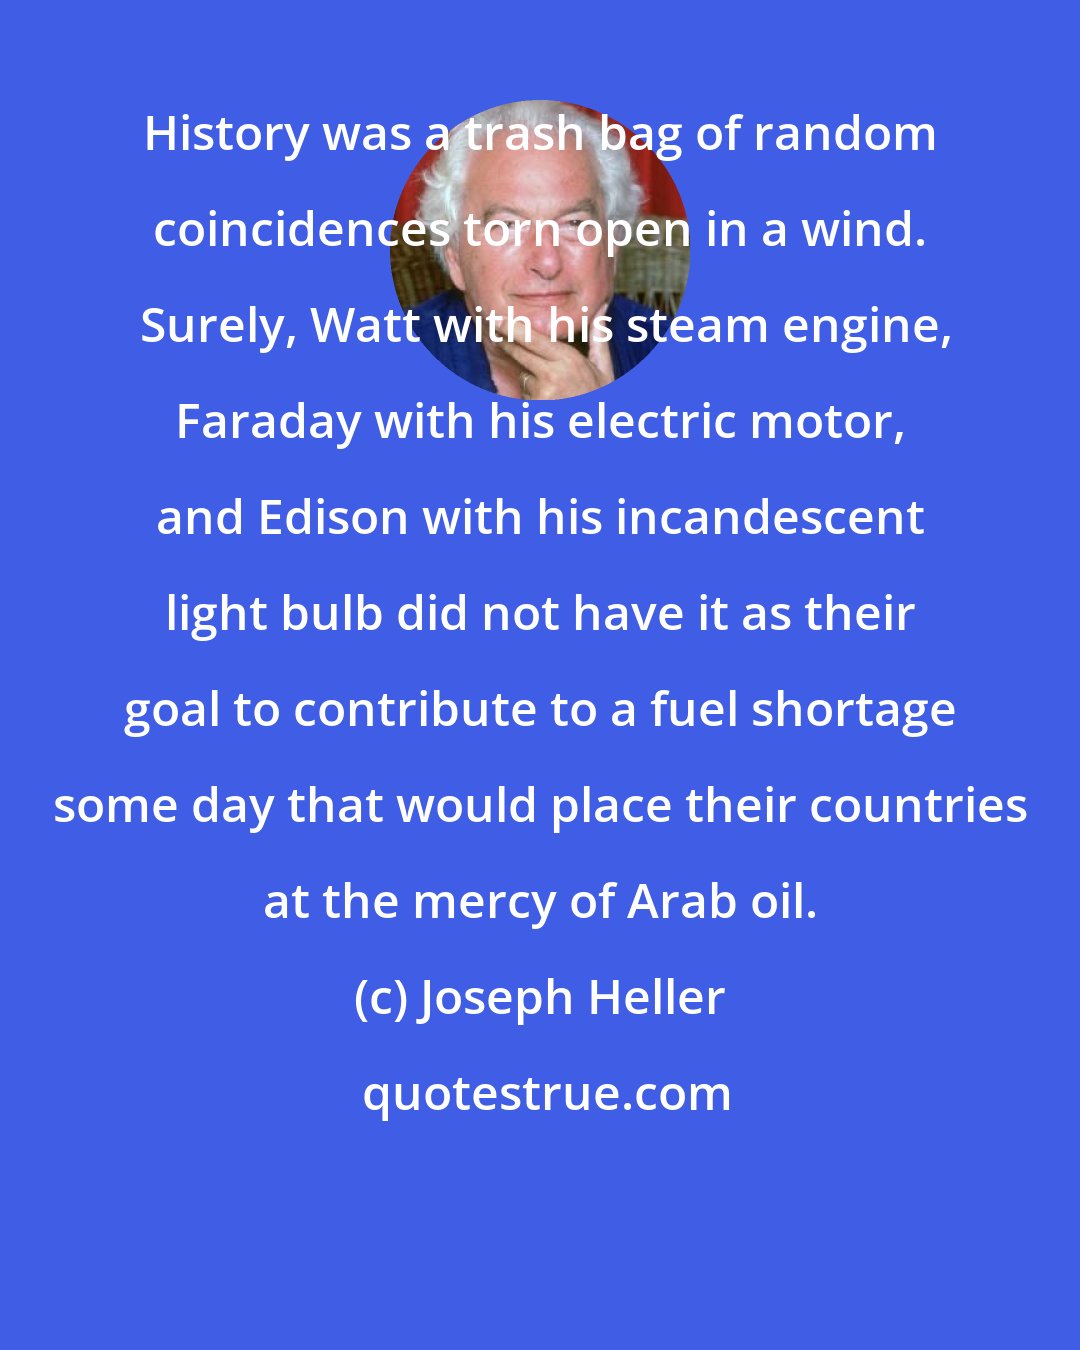 Joseph Heller: History was a trash bag of random coincidences torn open in a wind.  Surely, Watt with his steam engine, Faraday with his electric motor, and Edison with his incandescent light bulb did not have it as their goal to contribute to a fuel shortage some day that would place their countries at the mercy of Arab oil.